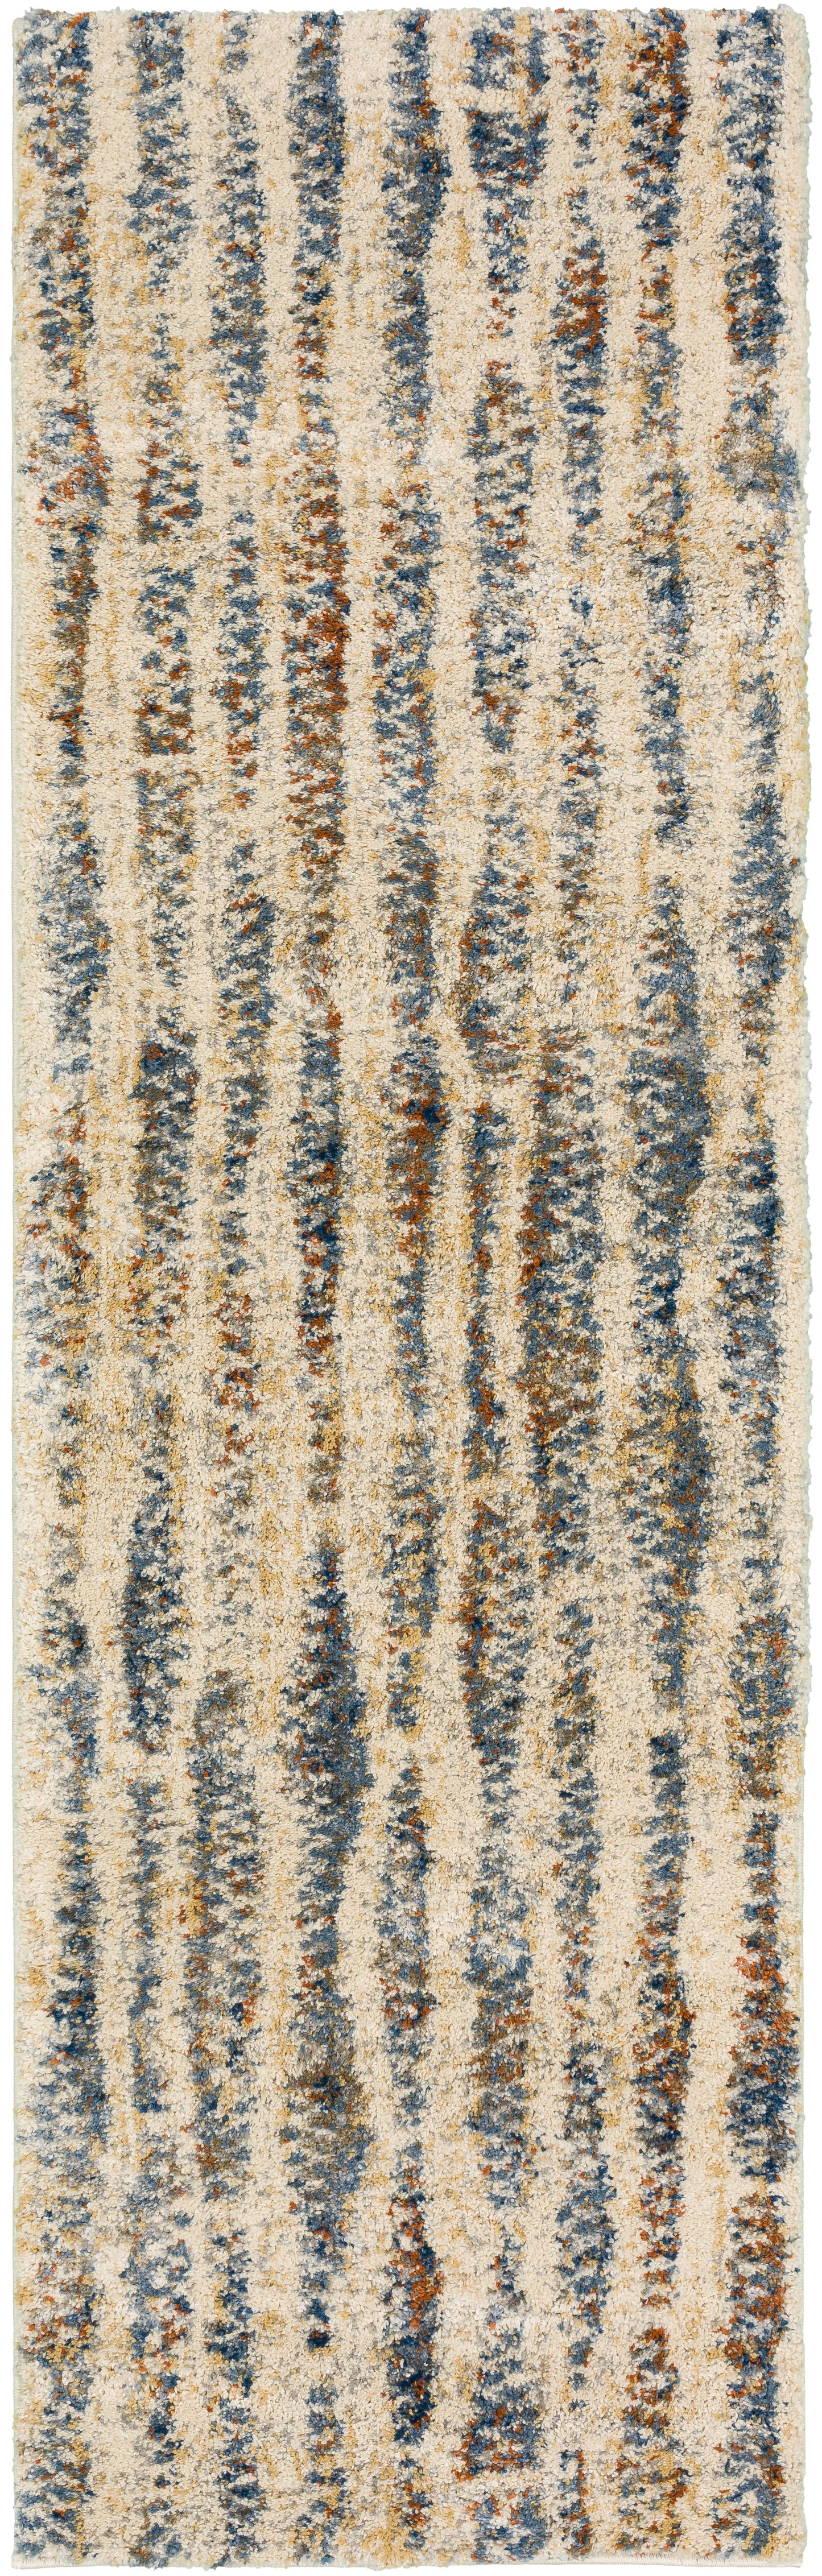 Orleans OR16 Machine Made Synthetic Blend Indoor Area Rug by Dalyn Rugs